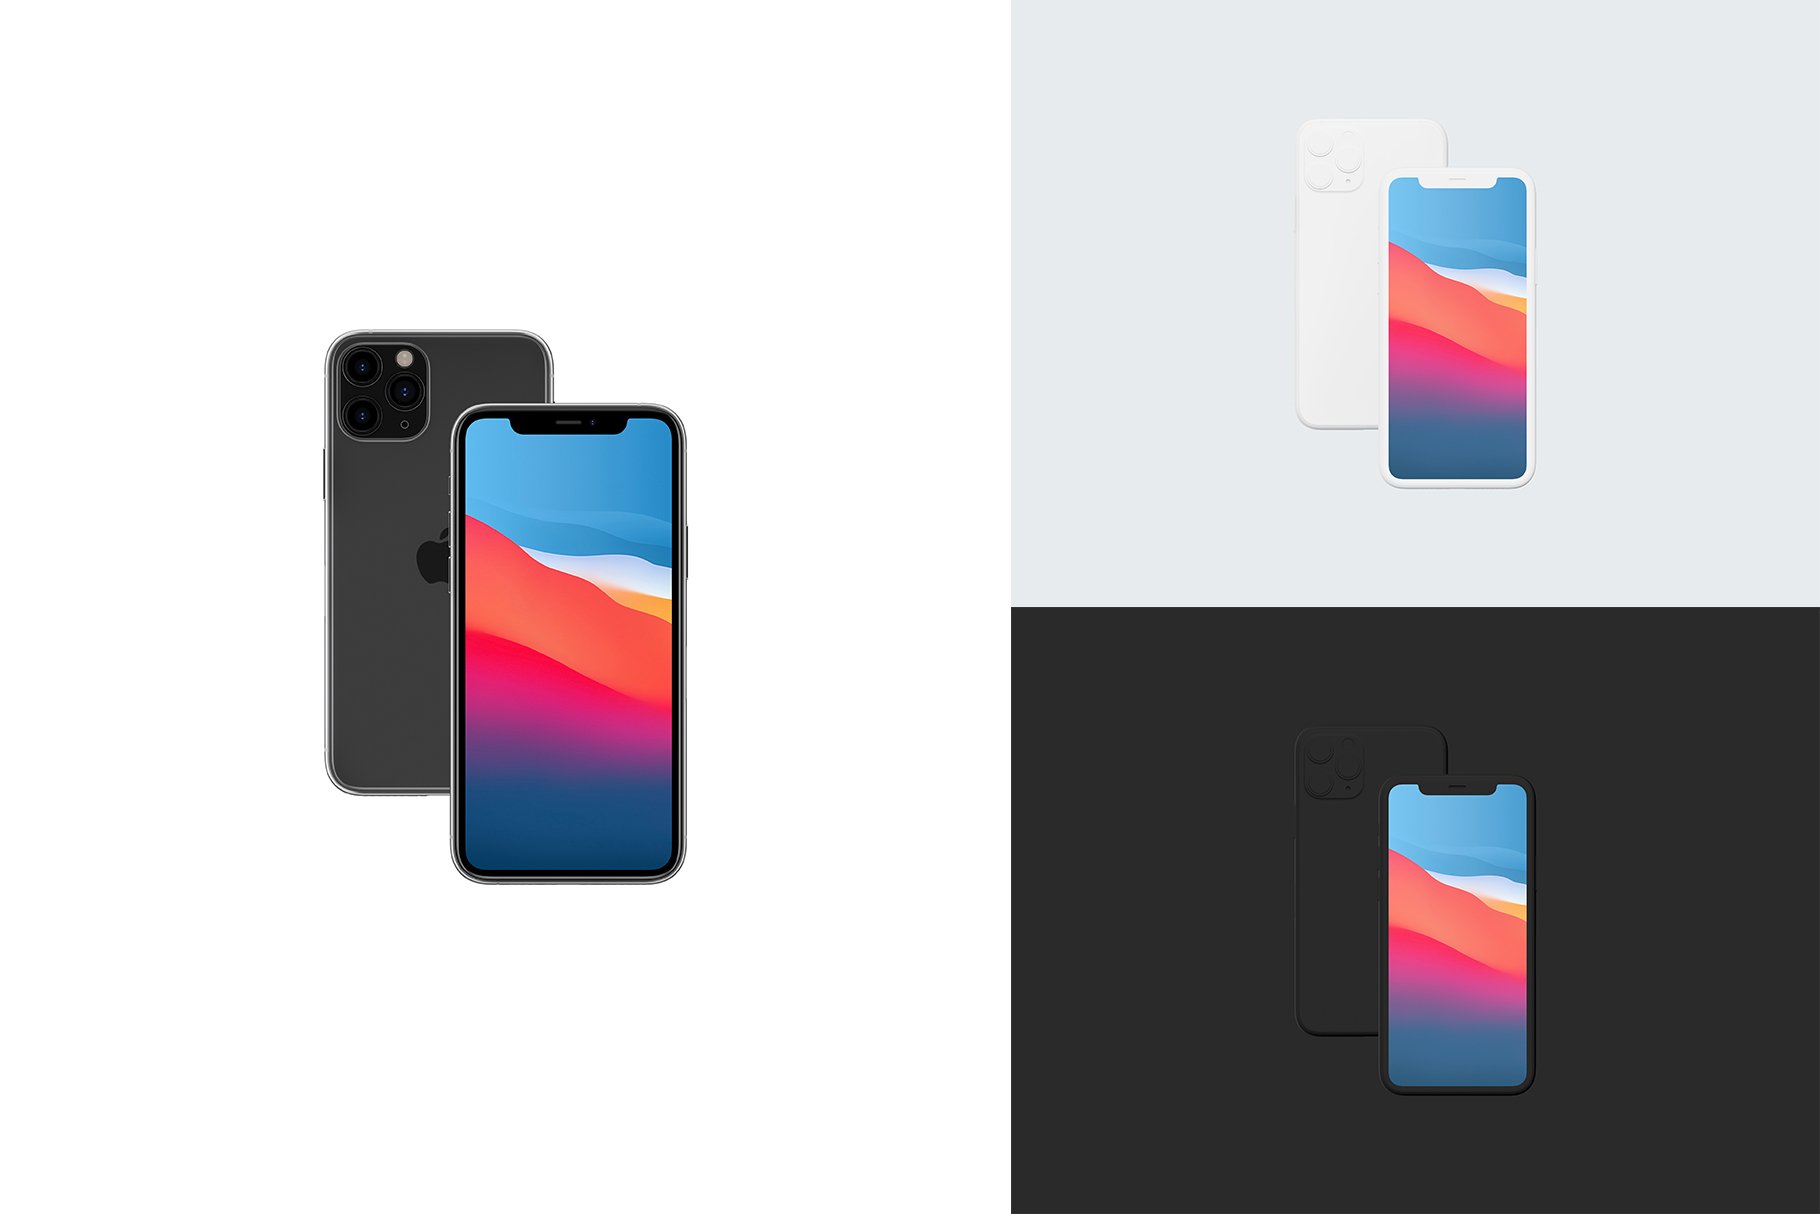 iphone 11 pro mockup pack by anthony boyd graphics 28s8v229 738